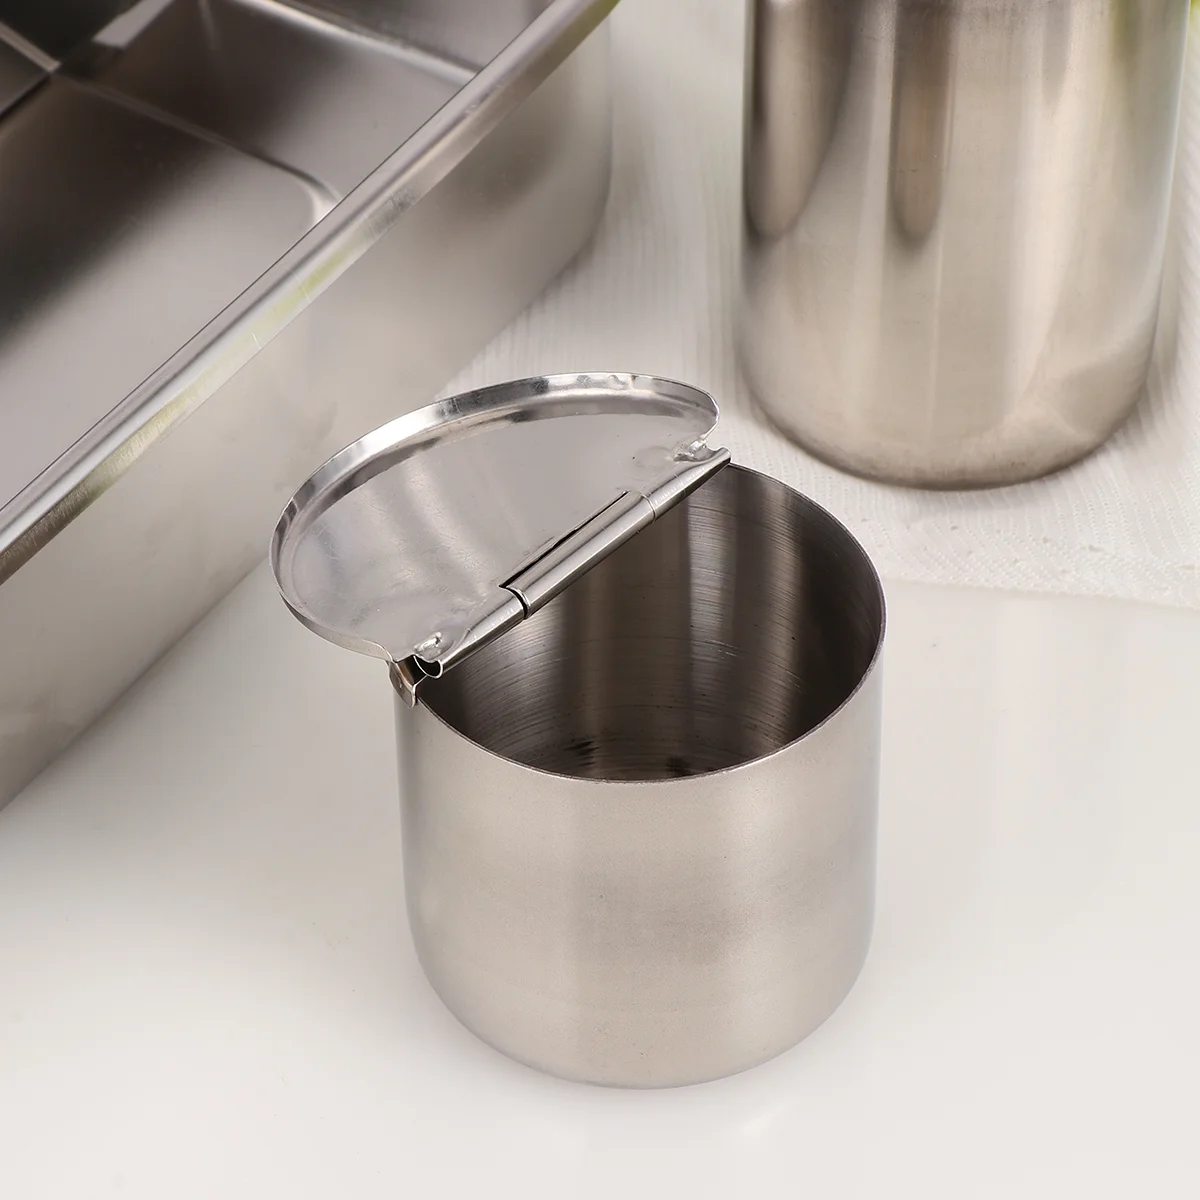 

Stainless Steel Surgical Sterilized Tray Jar Pot Container Bottle Tweezers Medical Injection Metal Tray For Therapy